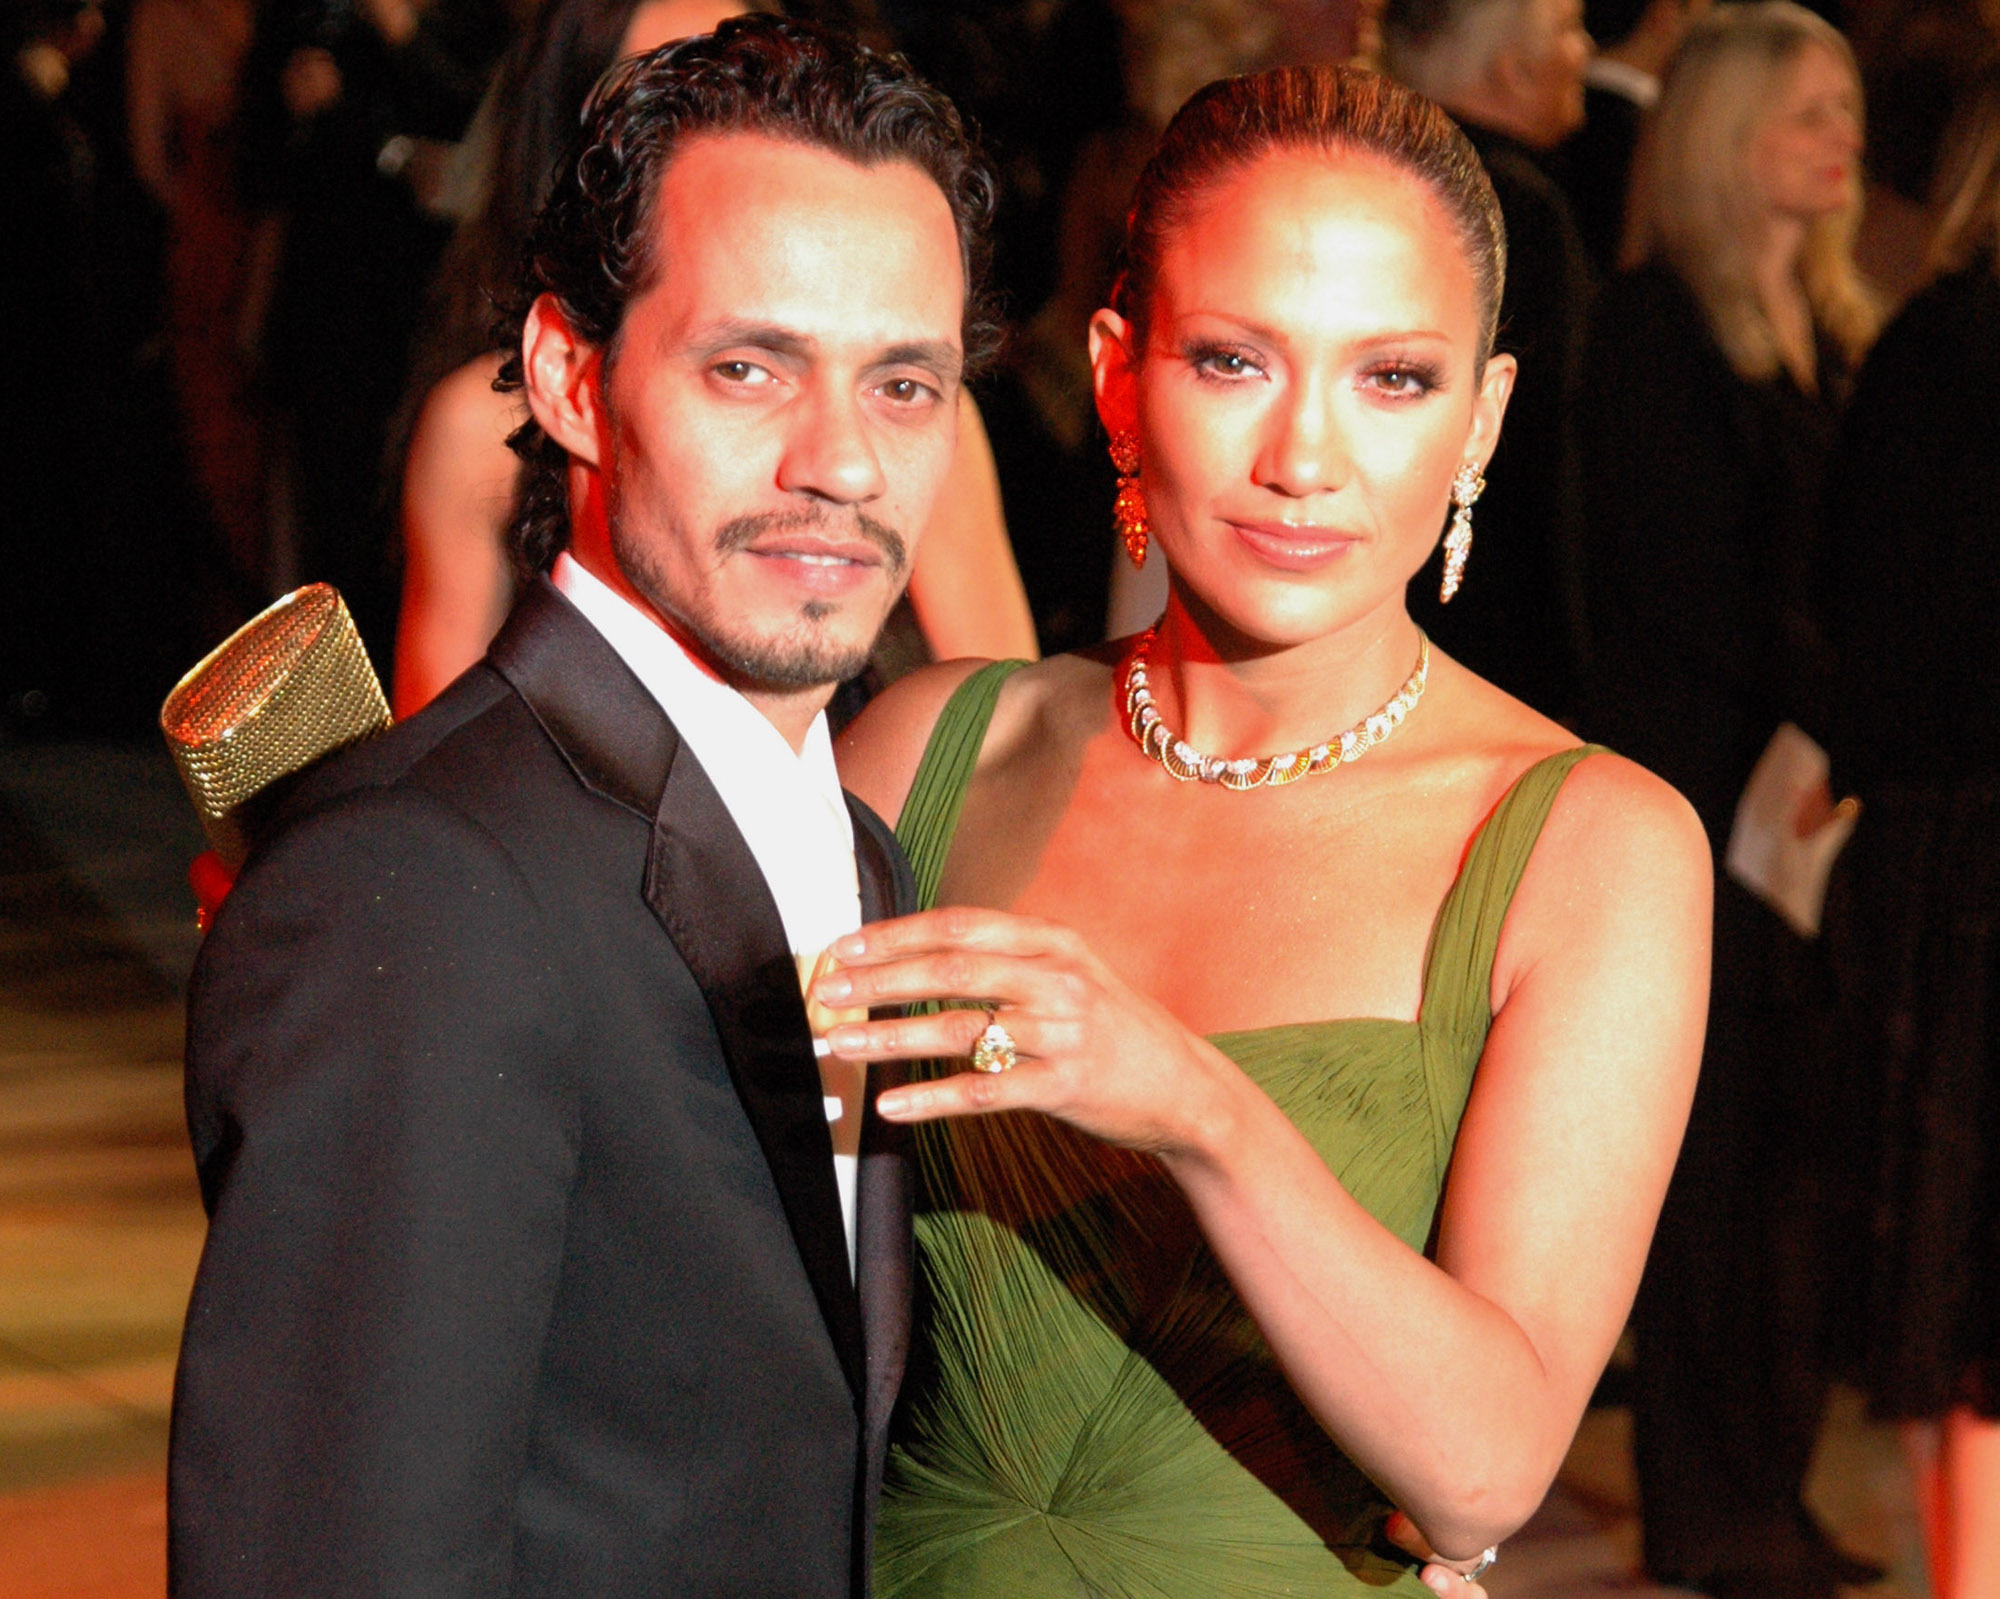 Marc Anthony and Jennifer Lopez attending the 2006 Vanity Fair Oscar Party